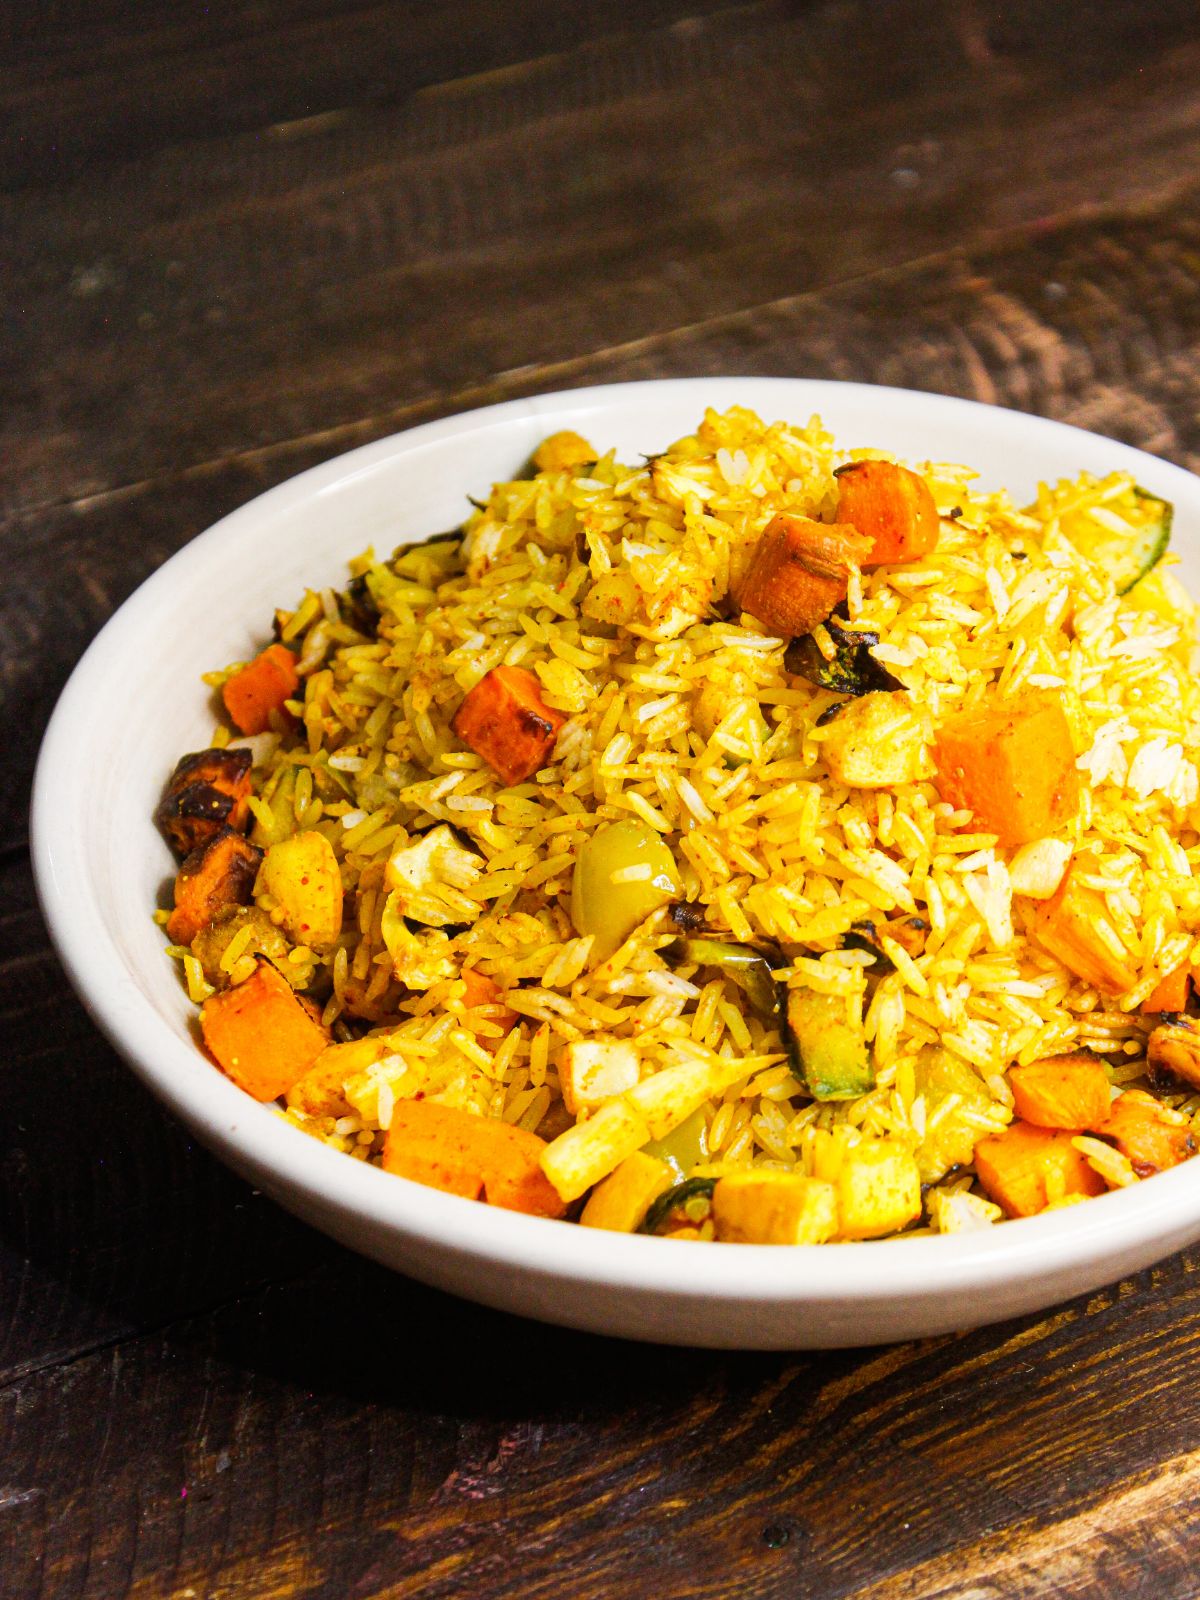 Serve hot yummy Vegetable Fried Rice